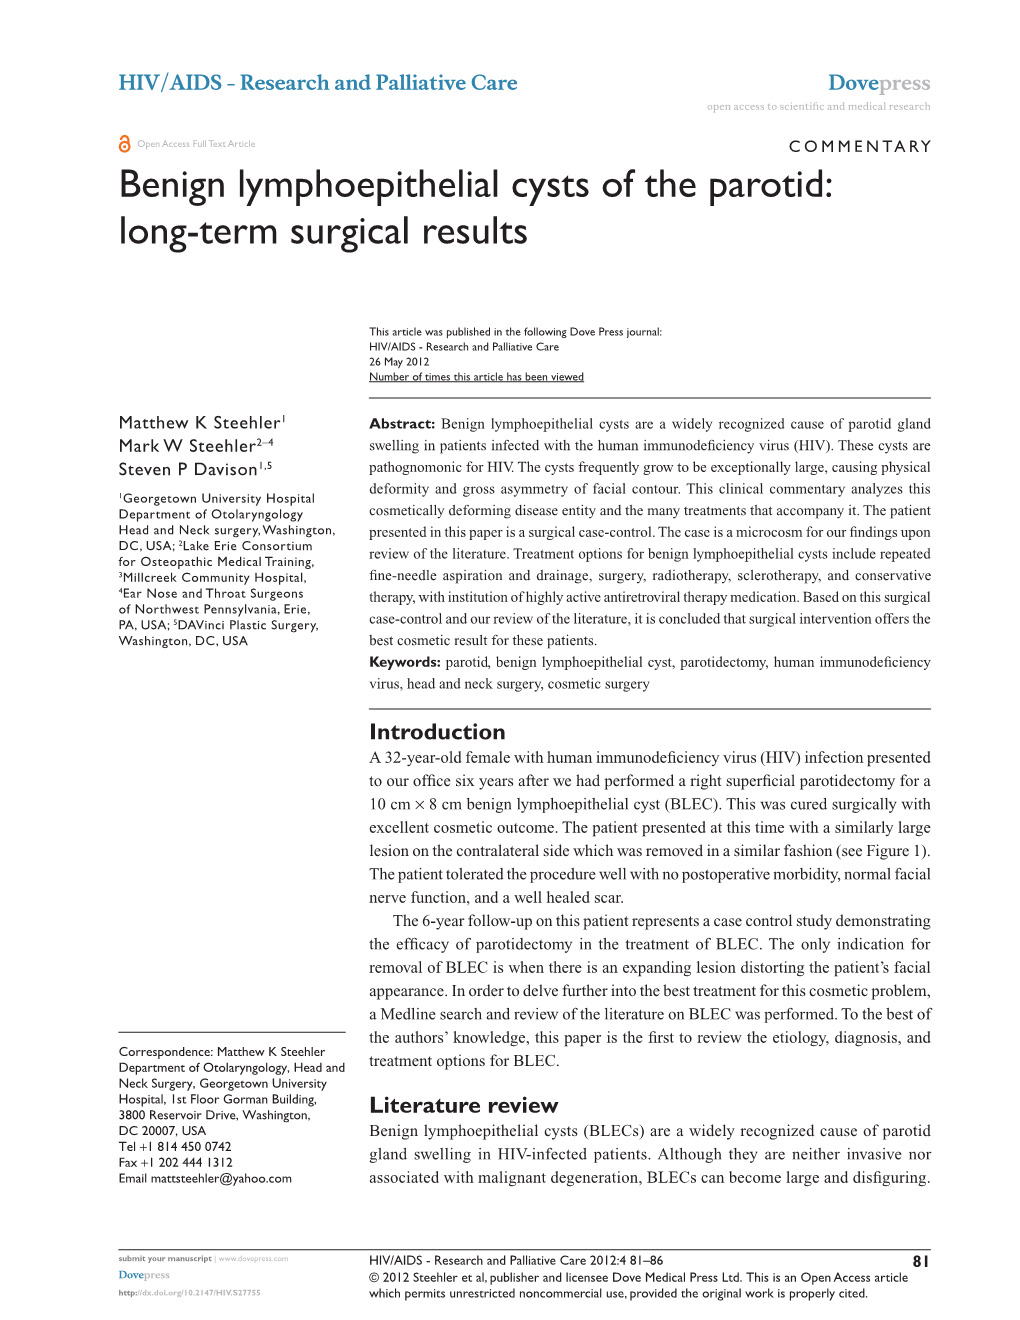 Benign Lymphoepithelial Cysts of the Parotid: Long-Term Surgical Results